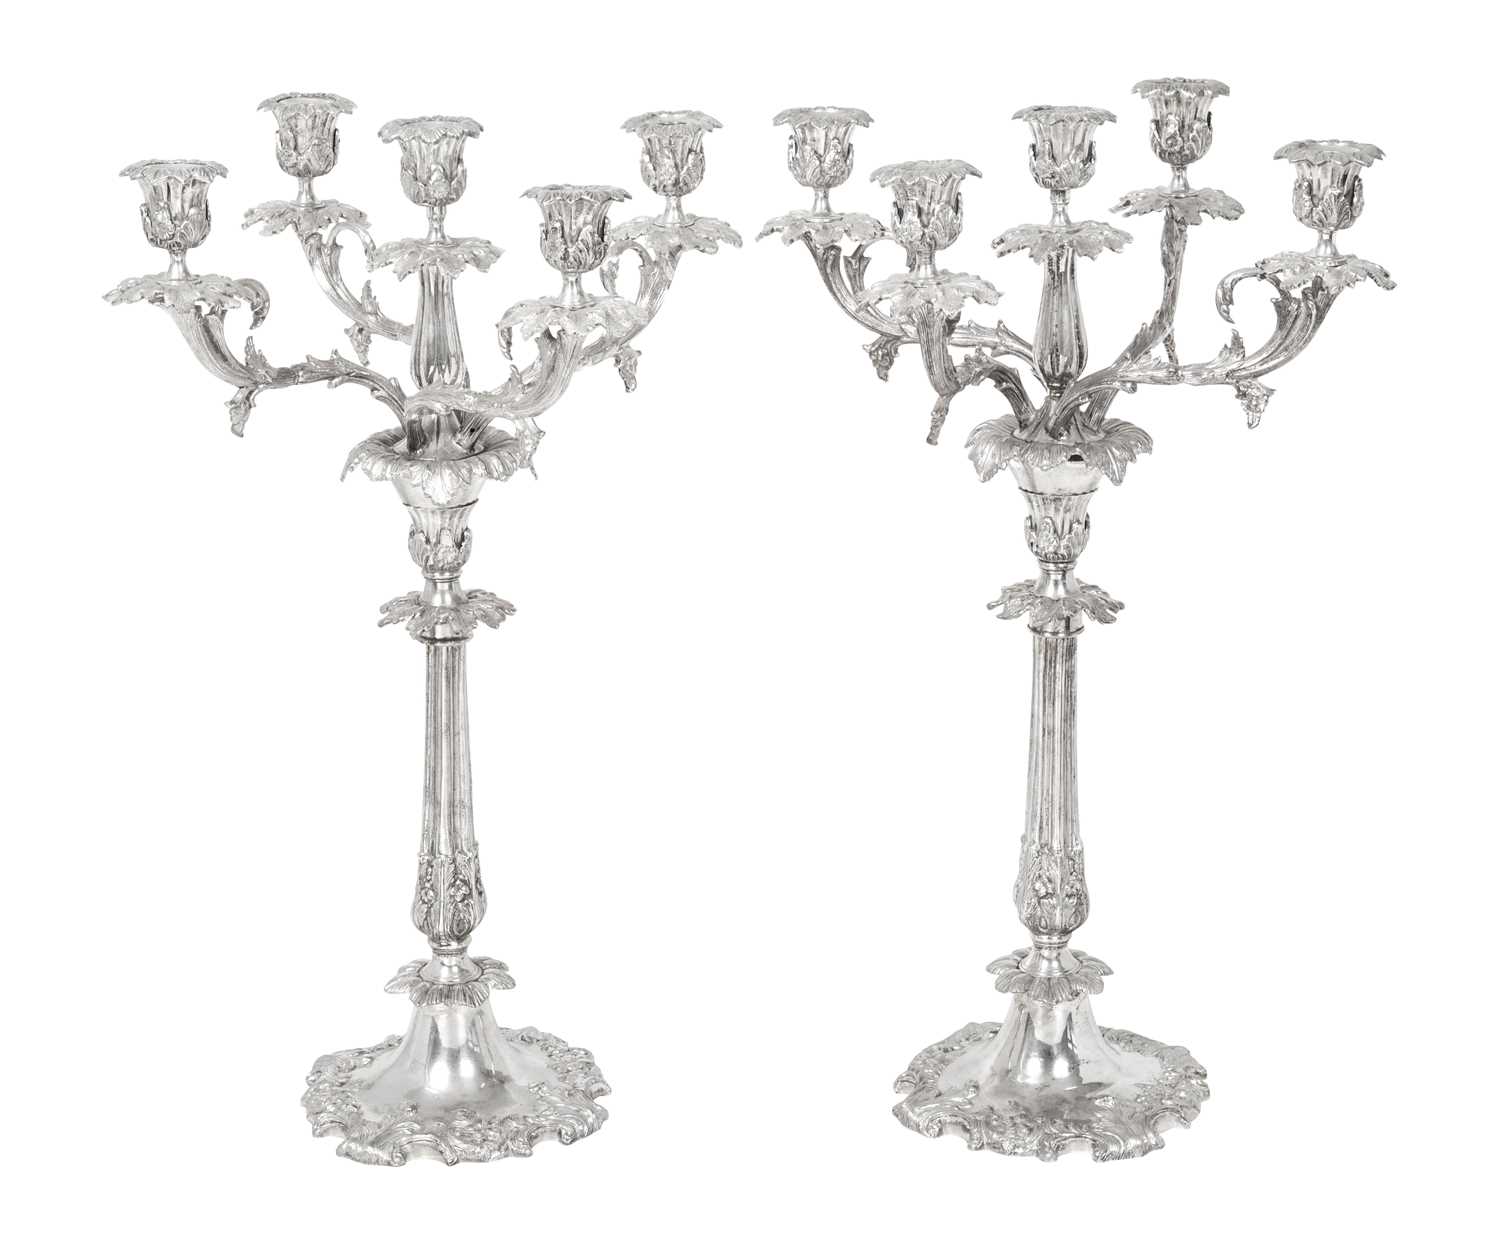 Lot 2255 - A Pair of American Silver Plate Five-Light Candelabra